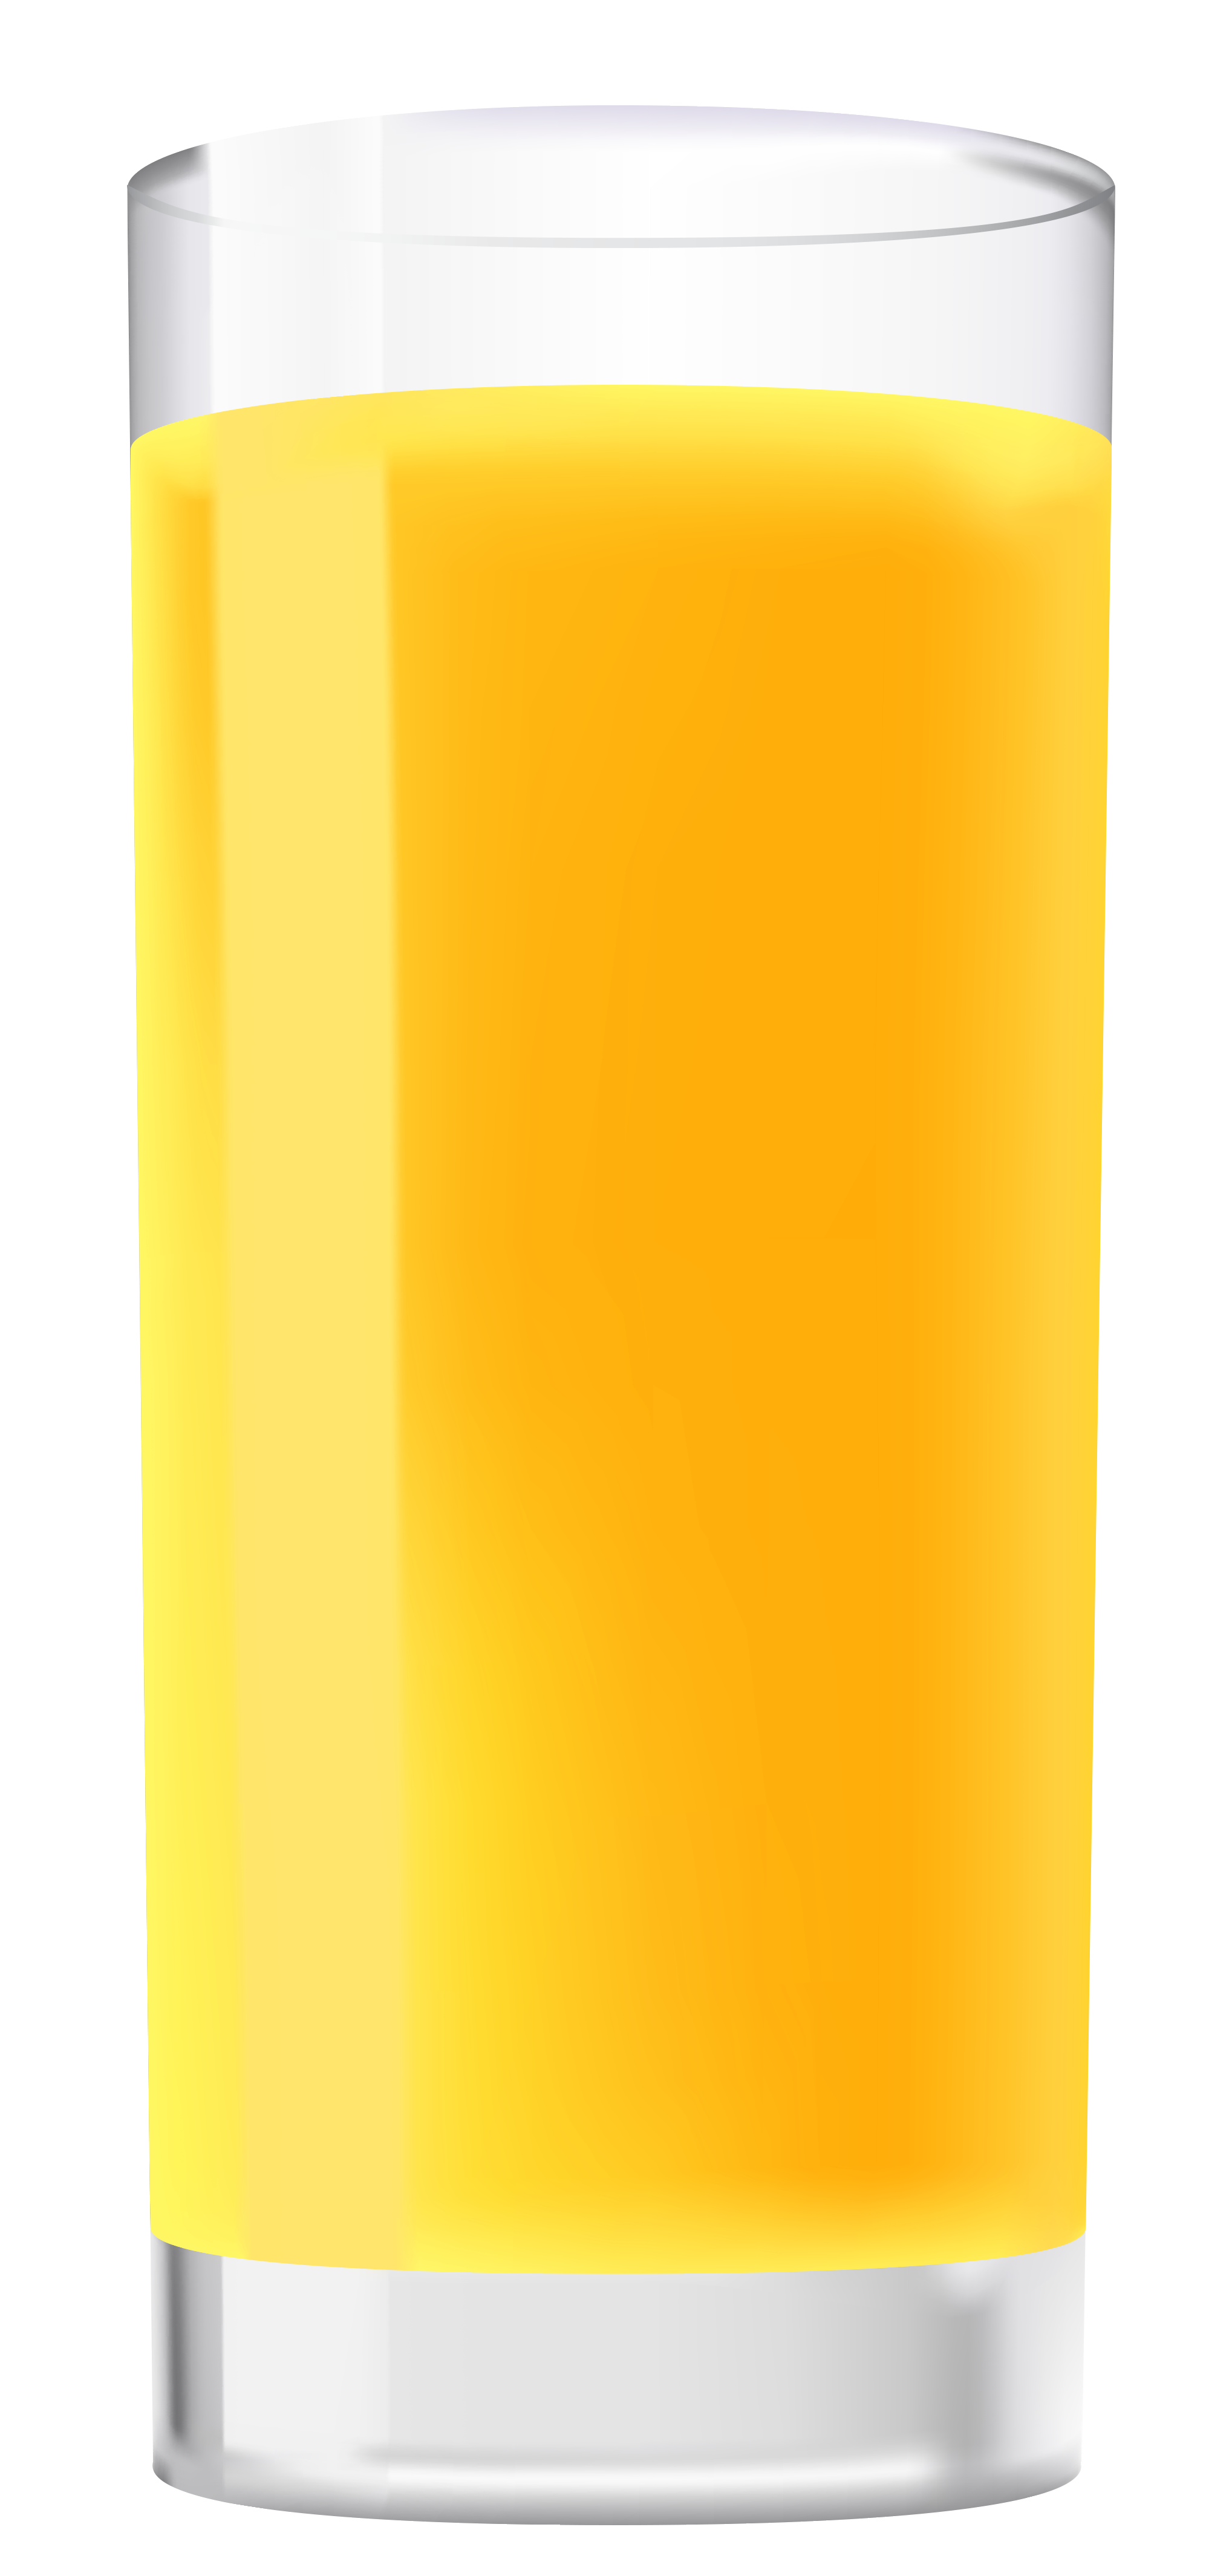 Glass Of Orange Juice Png Clipart Image Gallery Yopriceville High Quality Free Images And Transparent Png Clipart